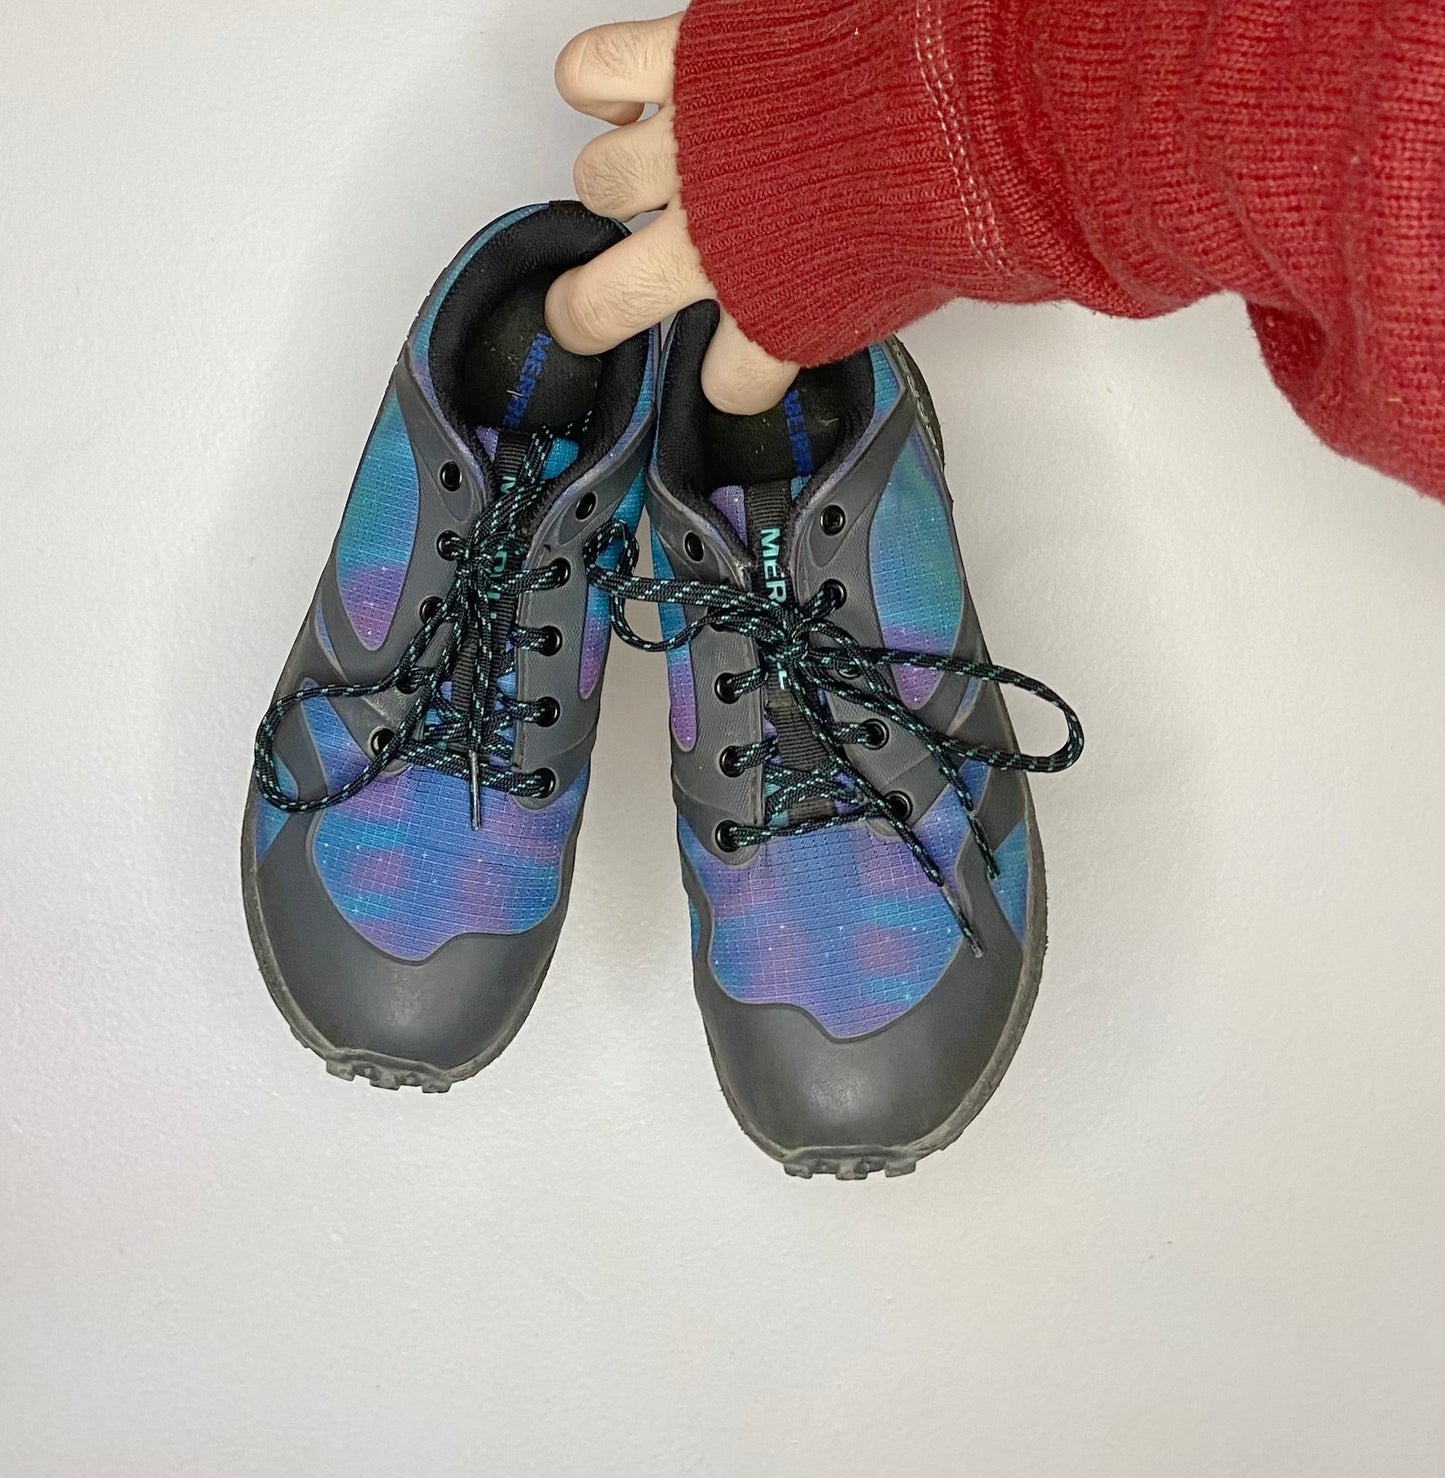 Y2.5 Space rock climbing or soccer shoes